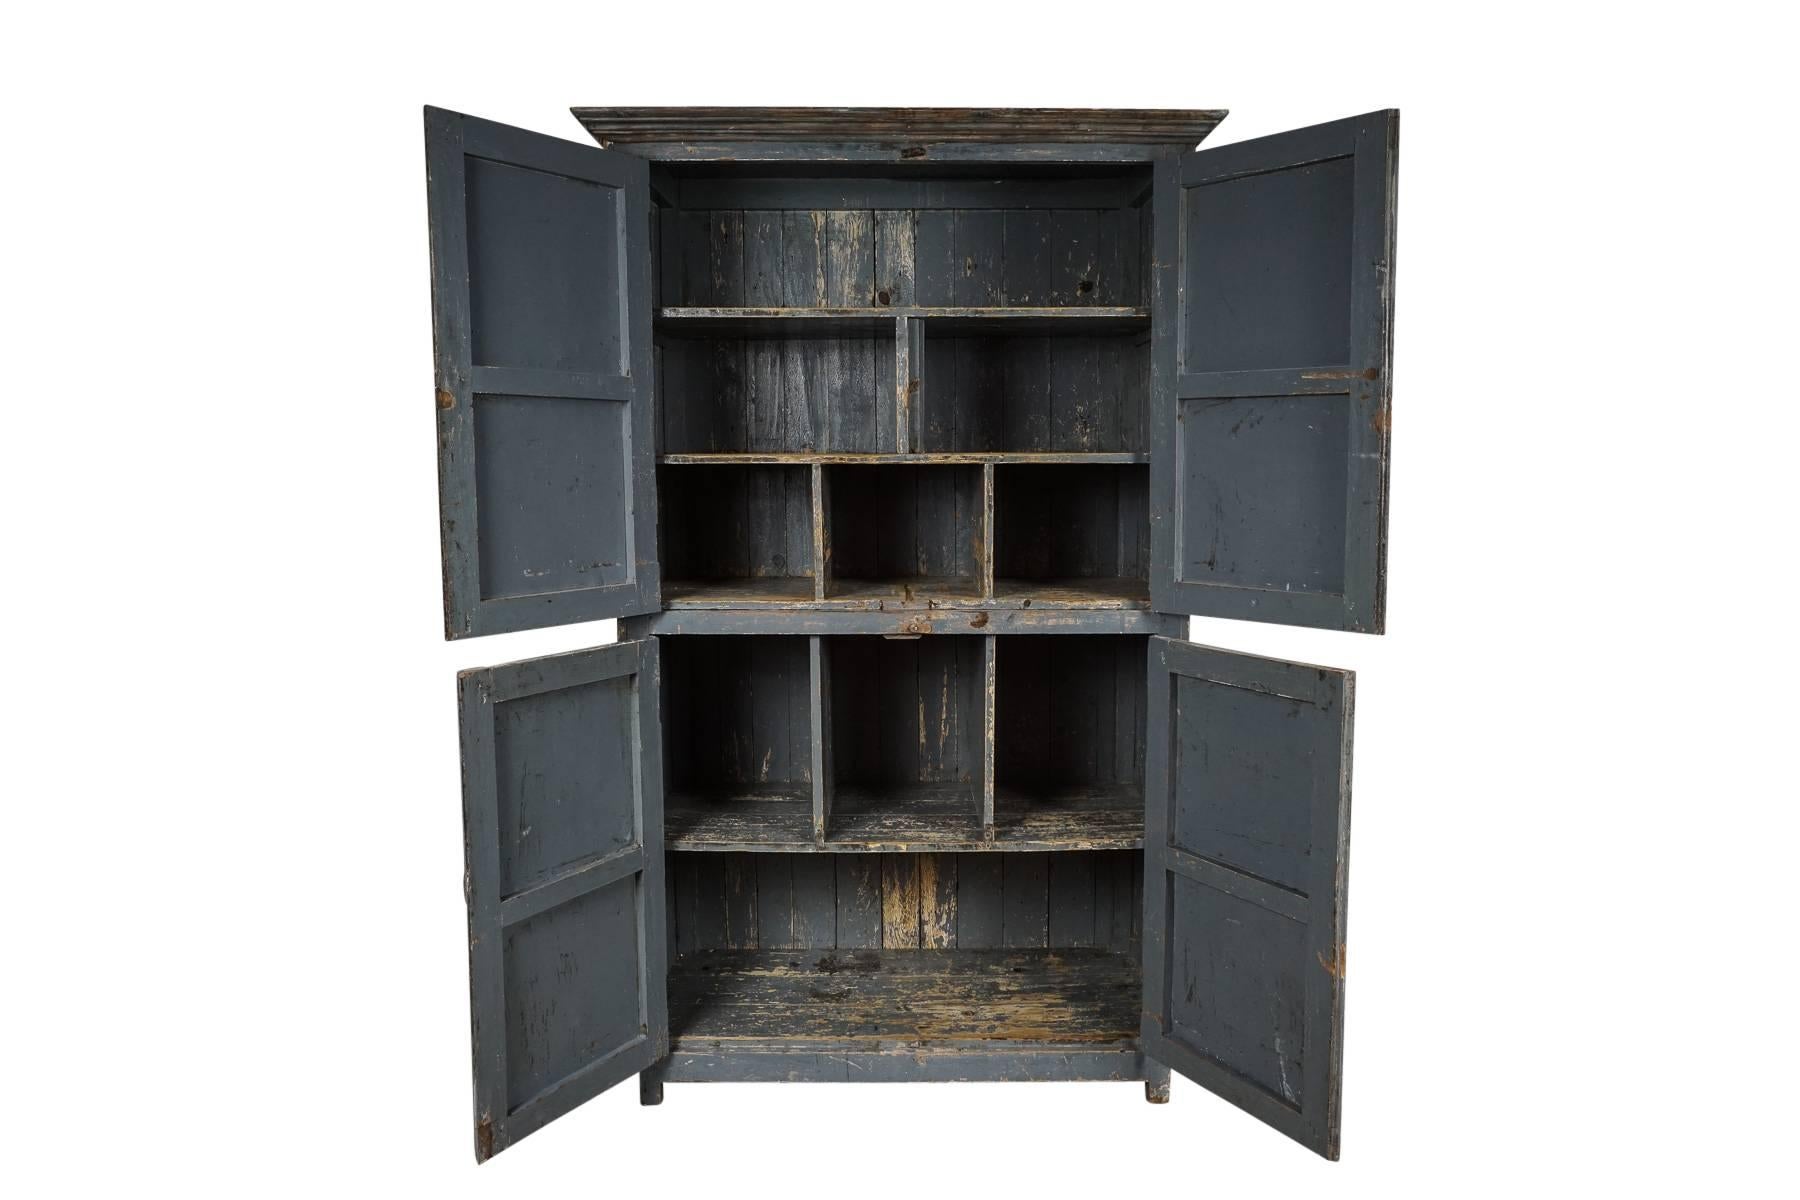 French four-door cabinet in original blue color with a fantastic patina. Wood and metal doors with original closures.